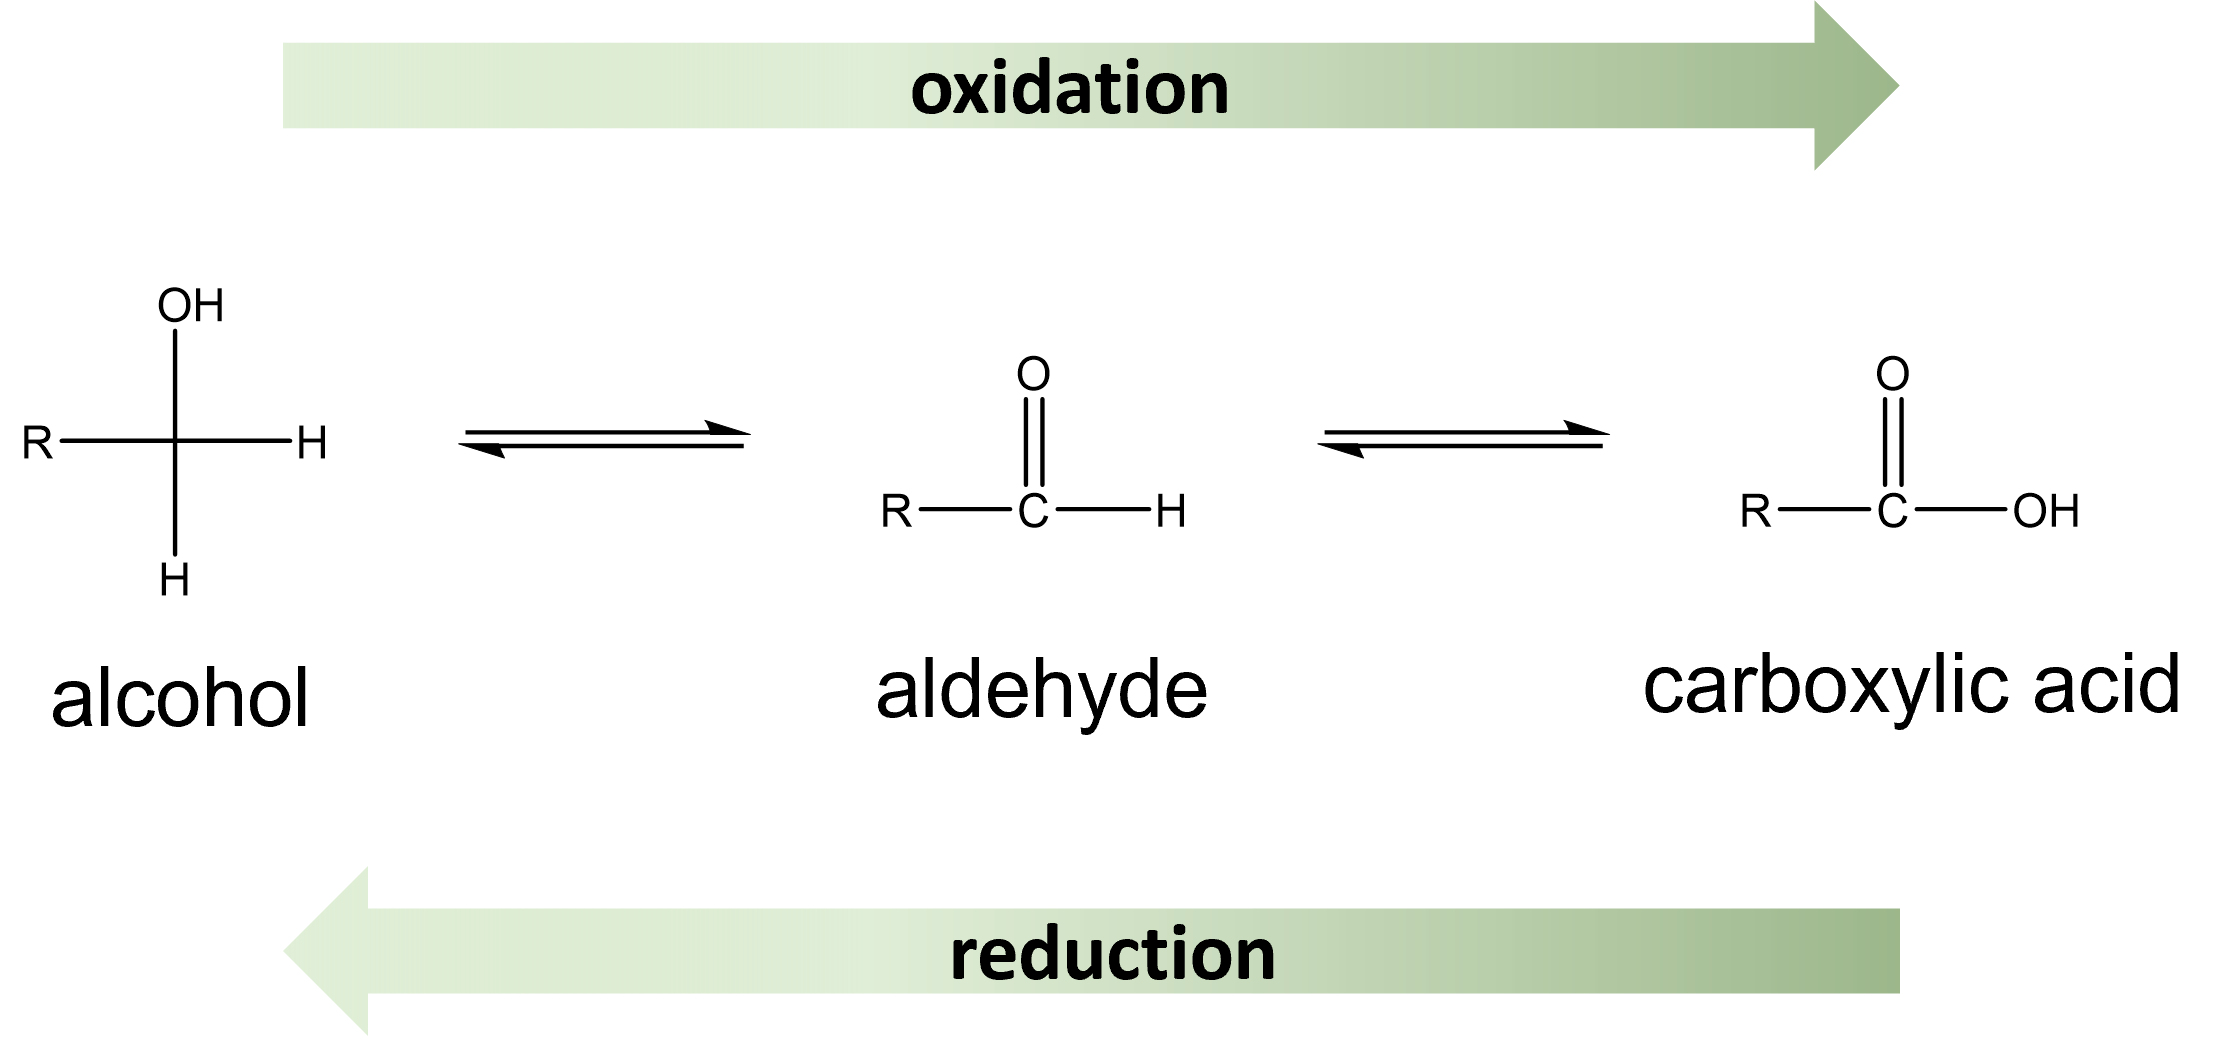 oxidation and reduction of an aldehyde